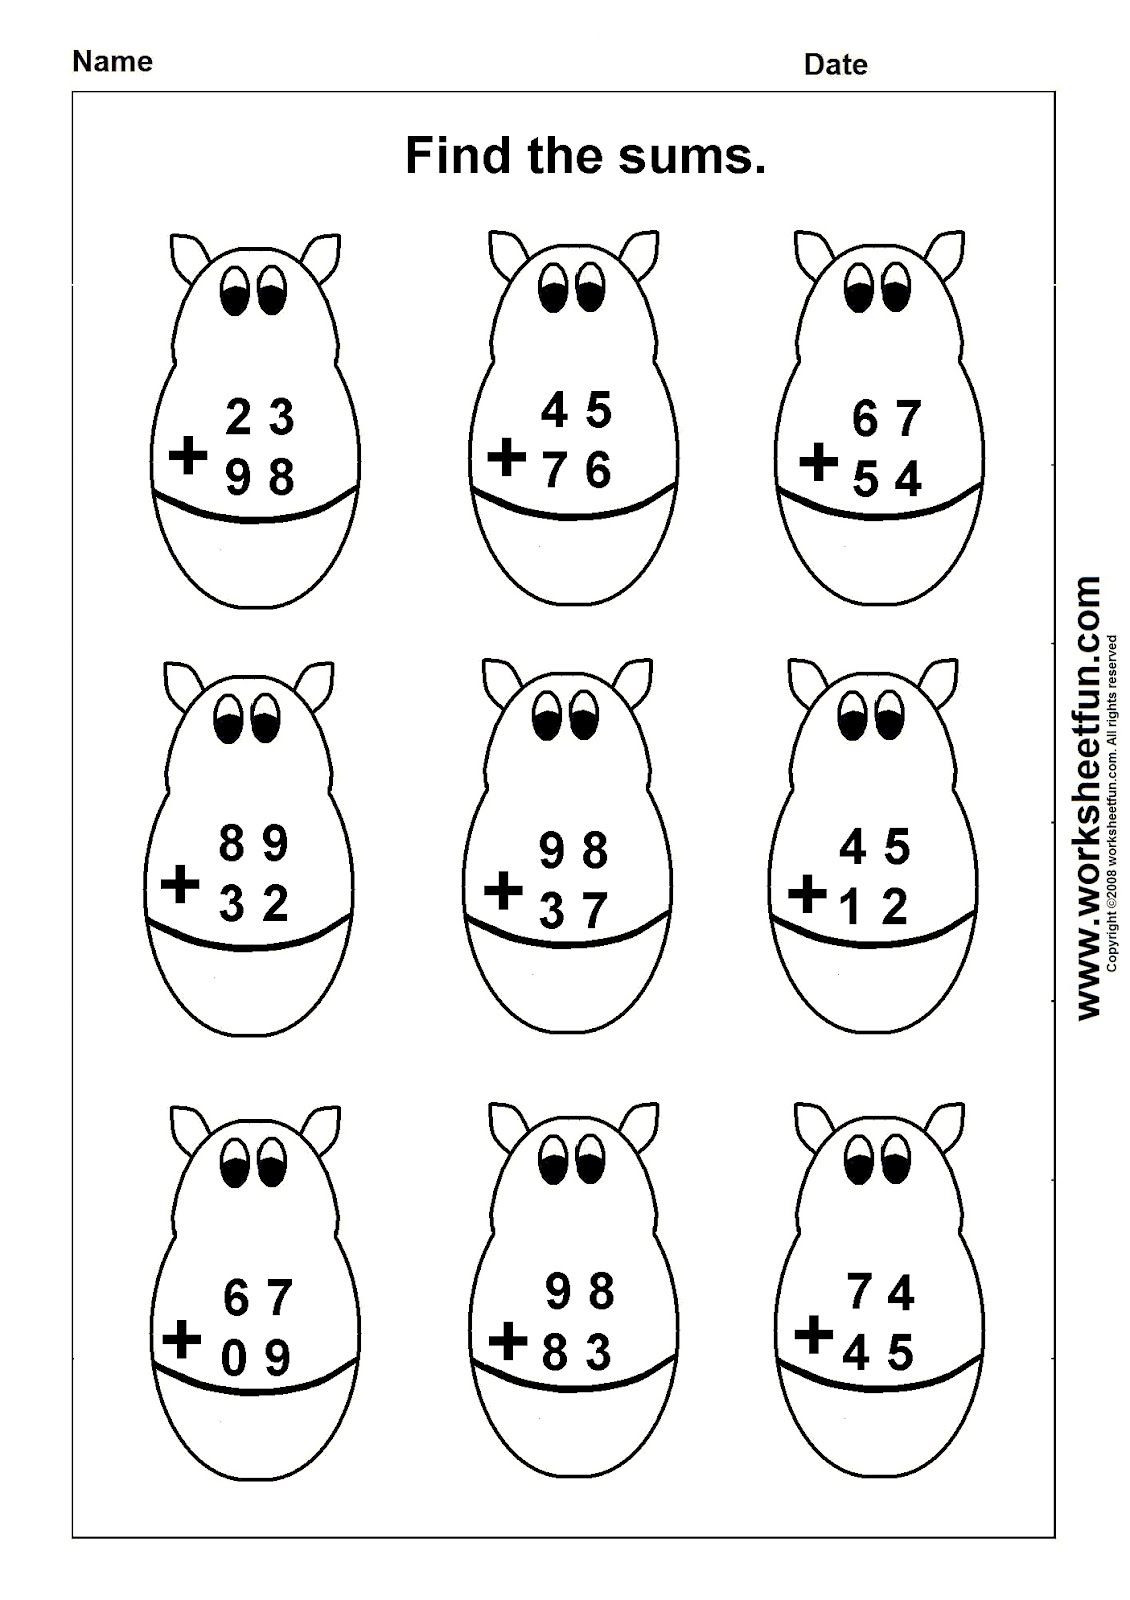 Addition with Regrouping Coloring Worksheets Double Digit Addition Coloring Worksheets